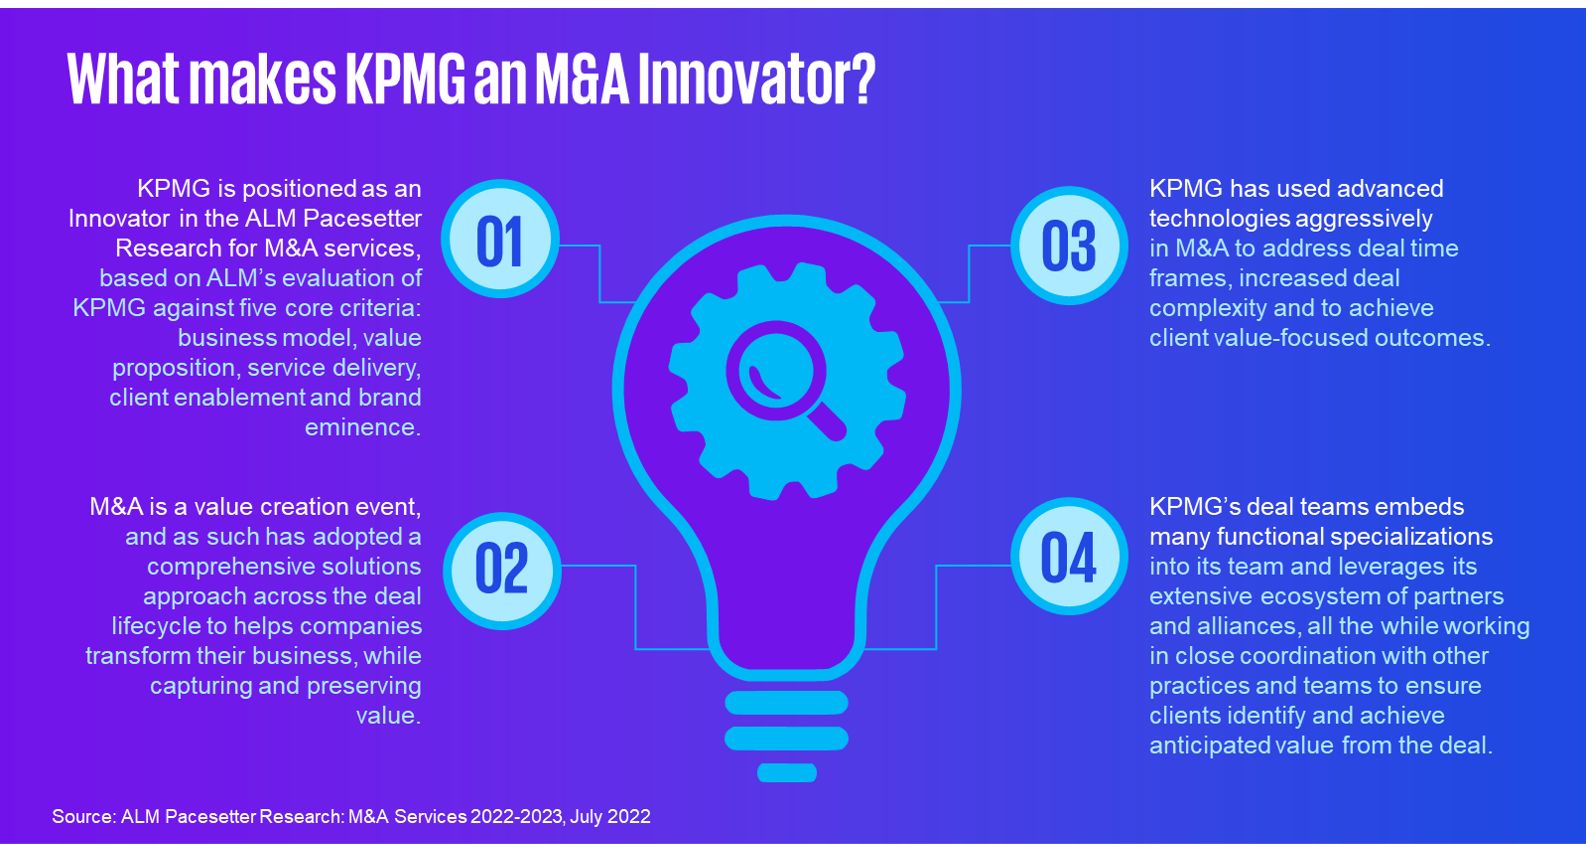 KPMG recognized as M&A Innovator by ALM Pacesetter Research